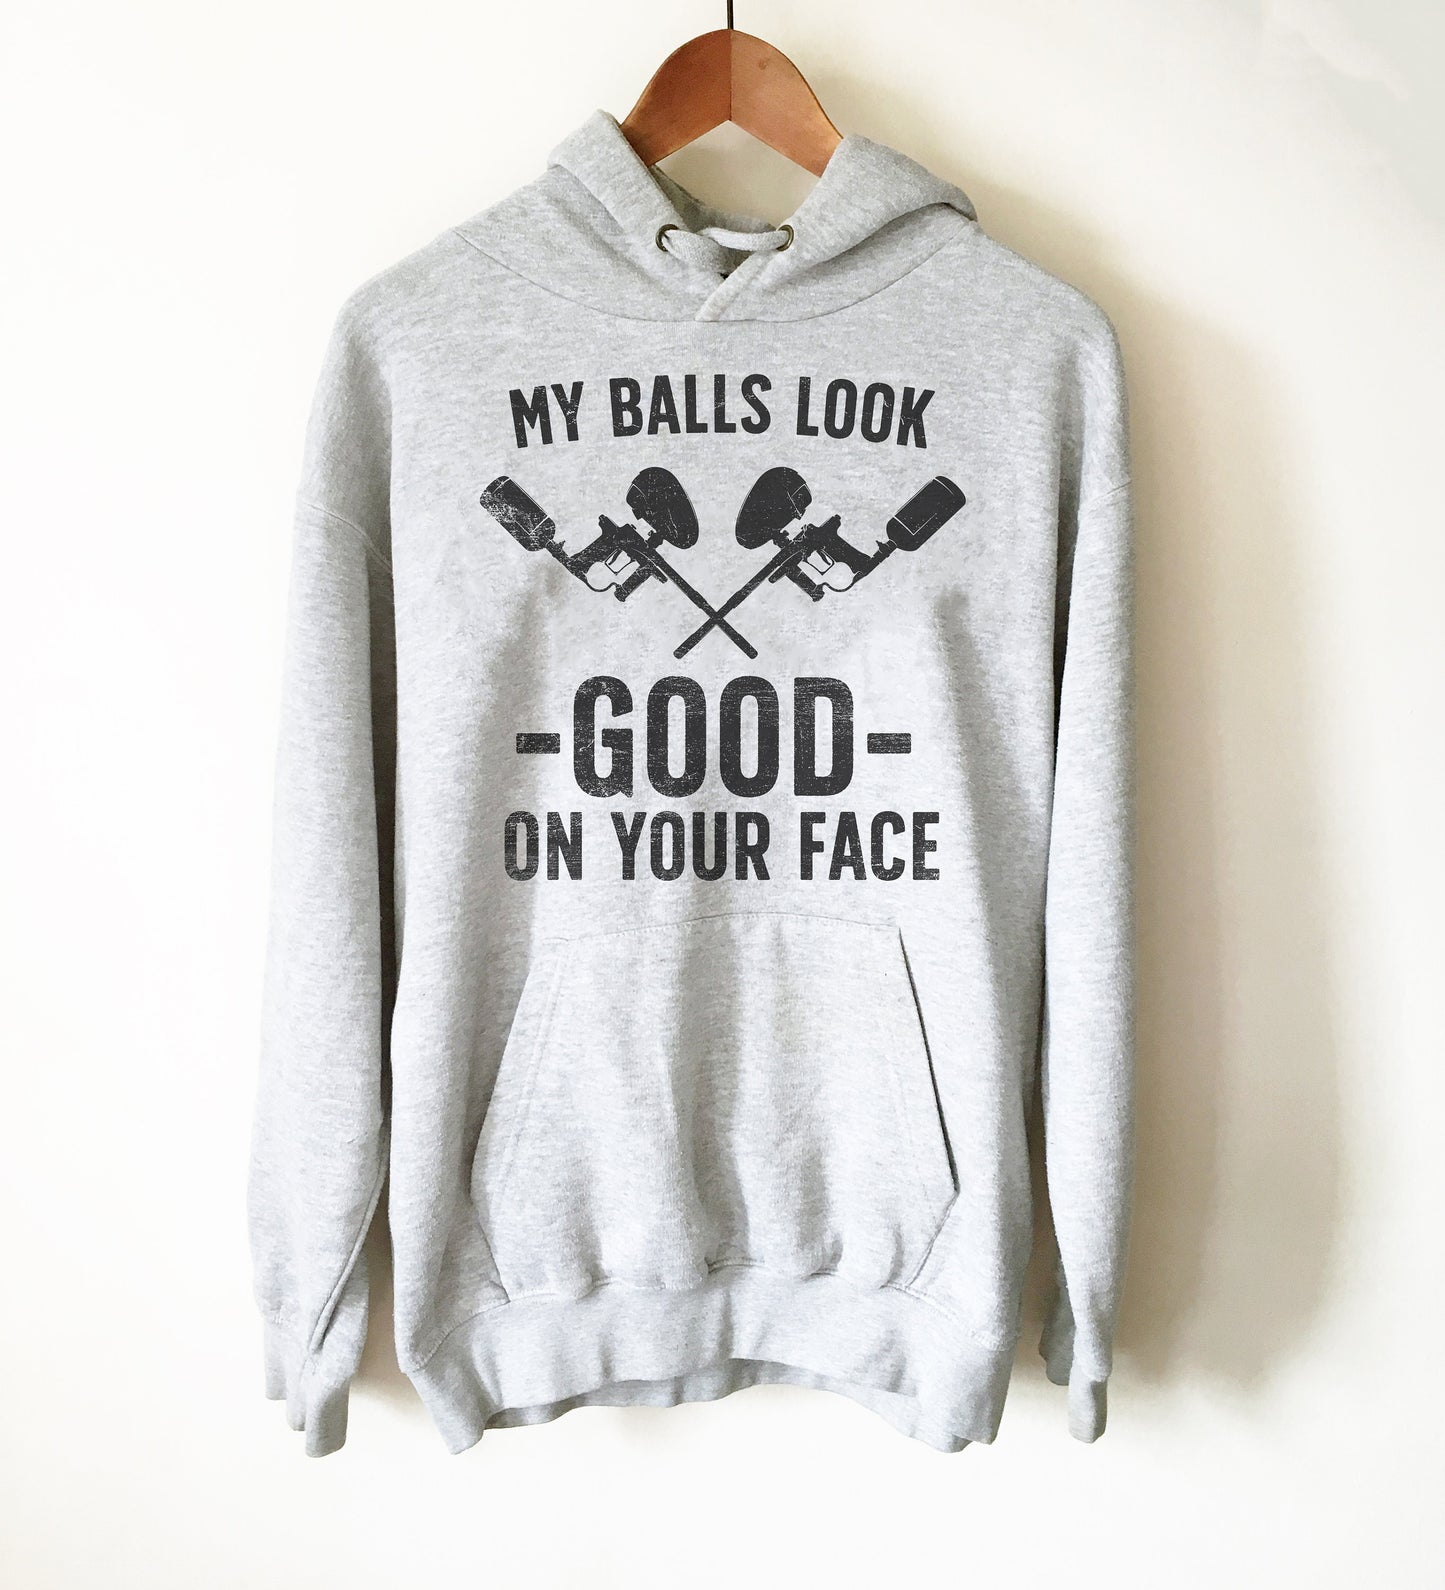 My Balls Look Good On Your Face Hoodie - Paintball Shirt, Paintball Gift, Bachelor Party Shirt, Team T-Shirts, Birthday Shirt